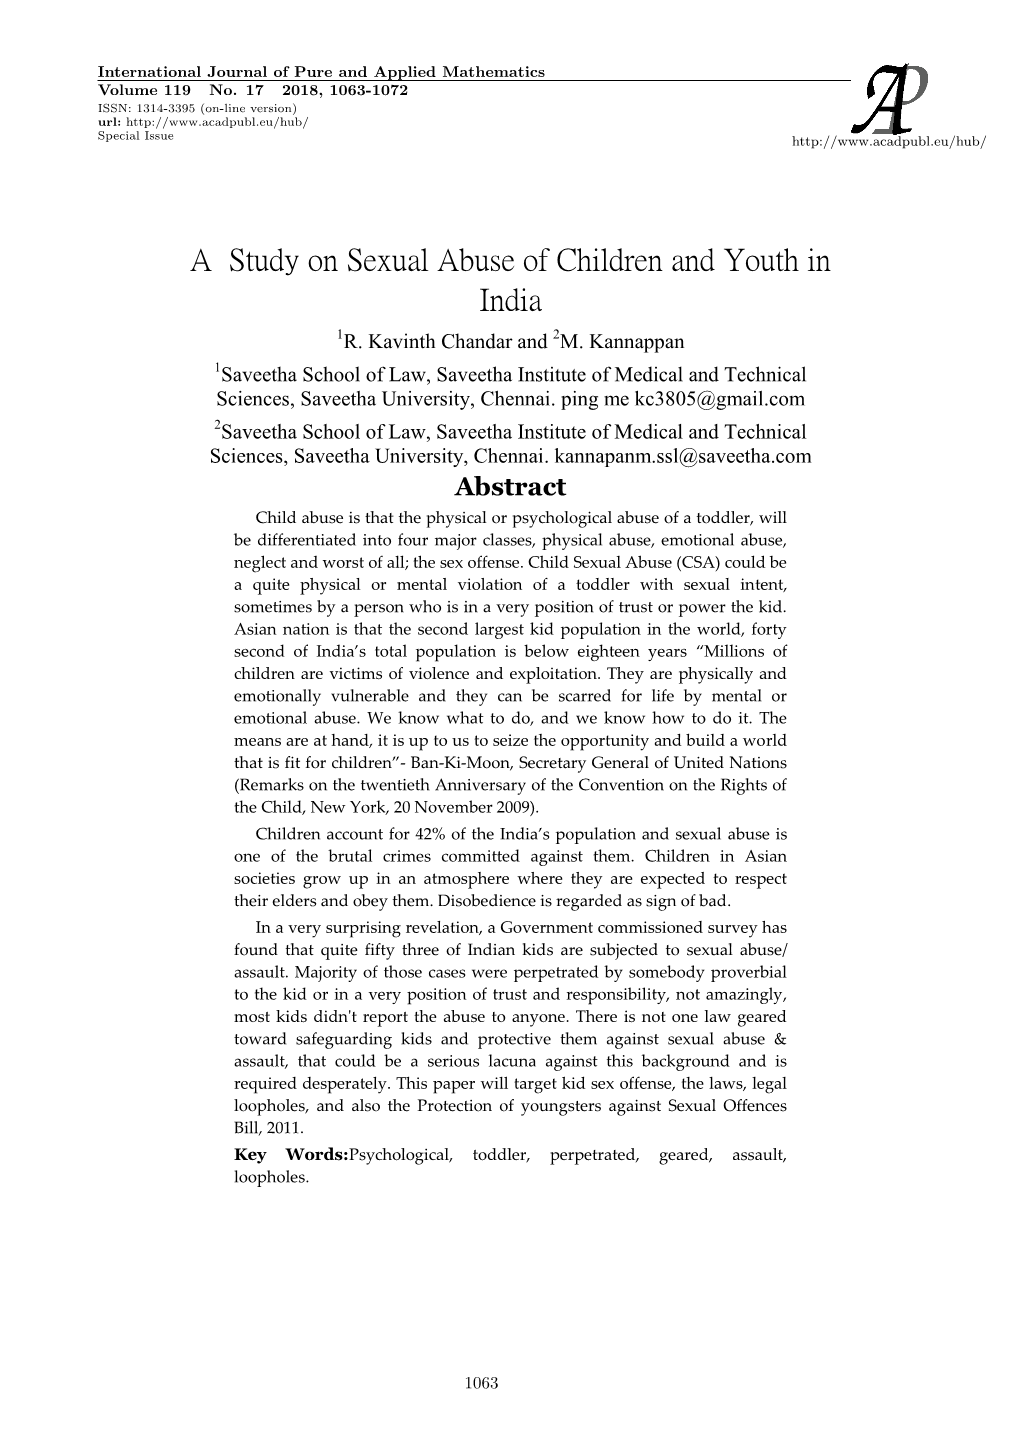 A Study on Sexual Abuse of Children and Youth in India 1R